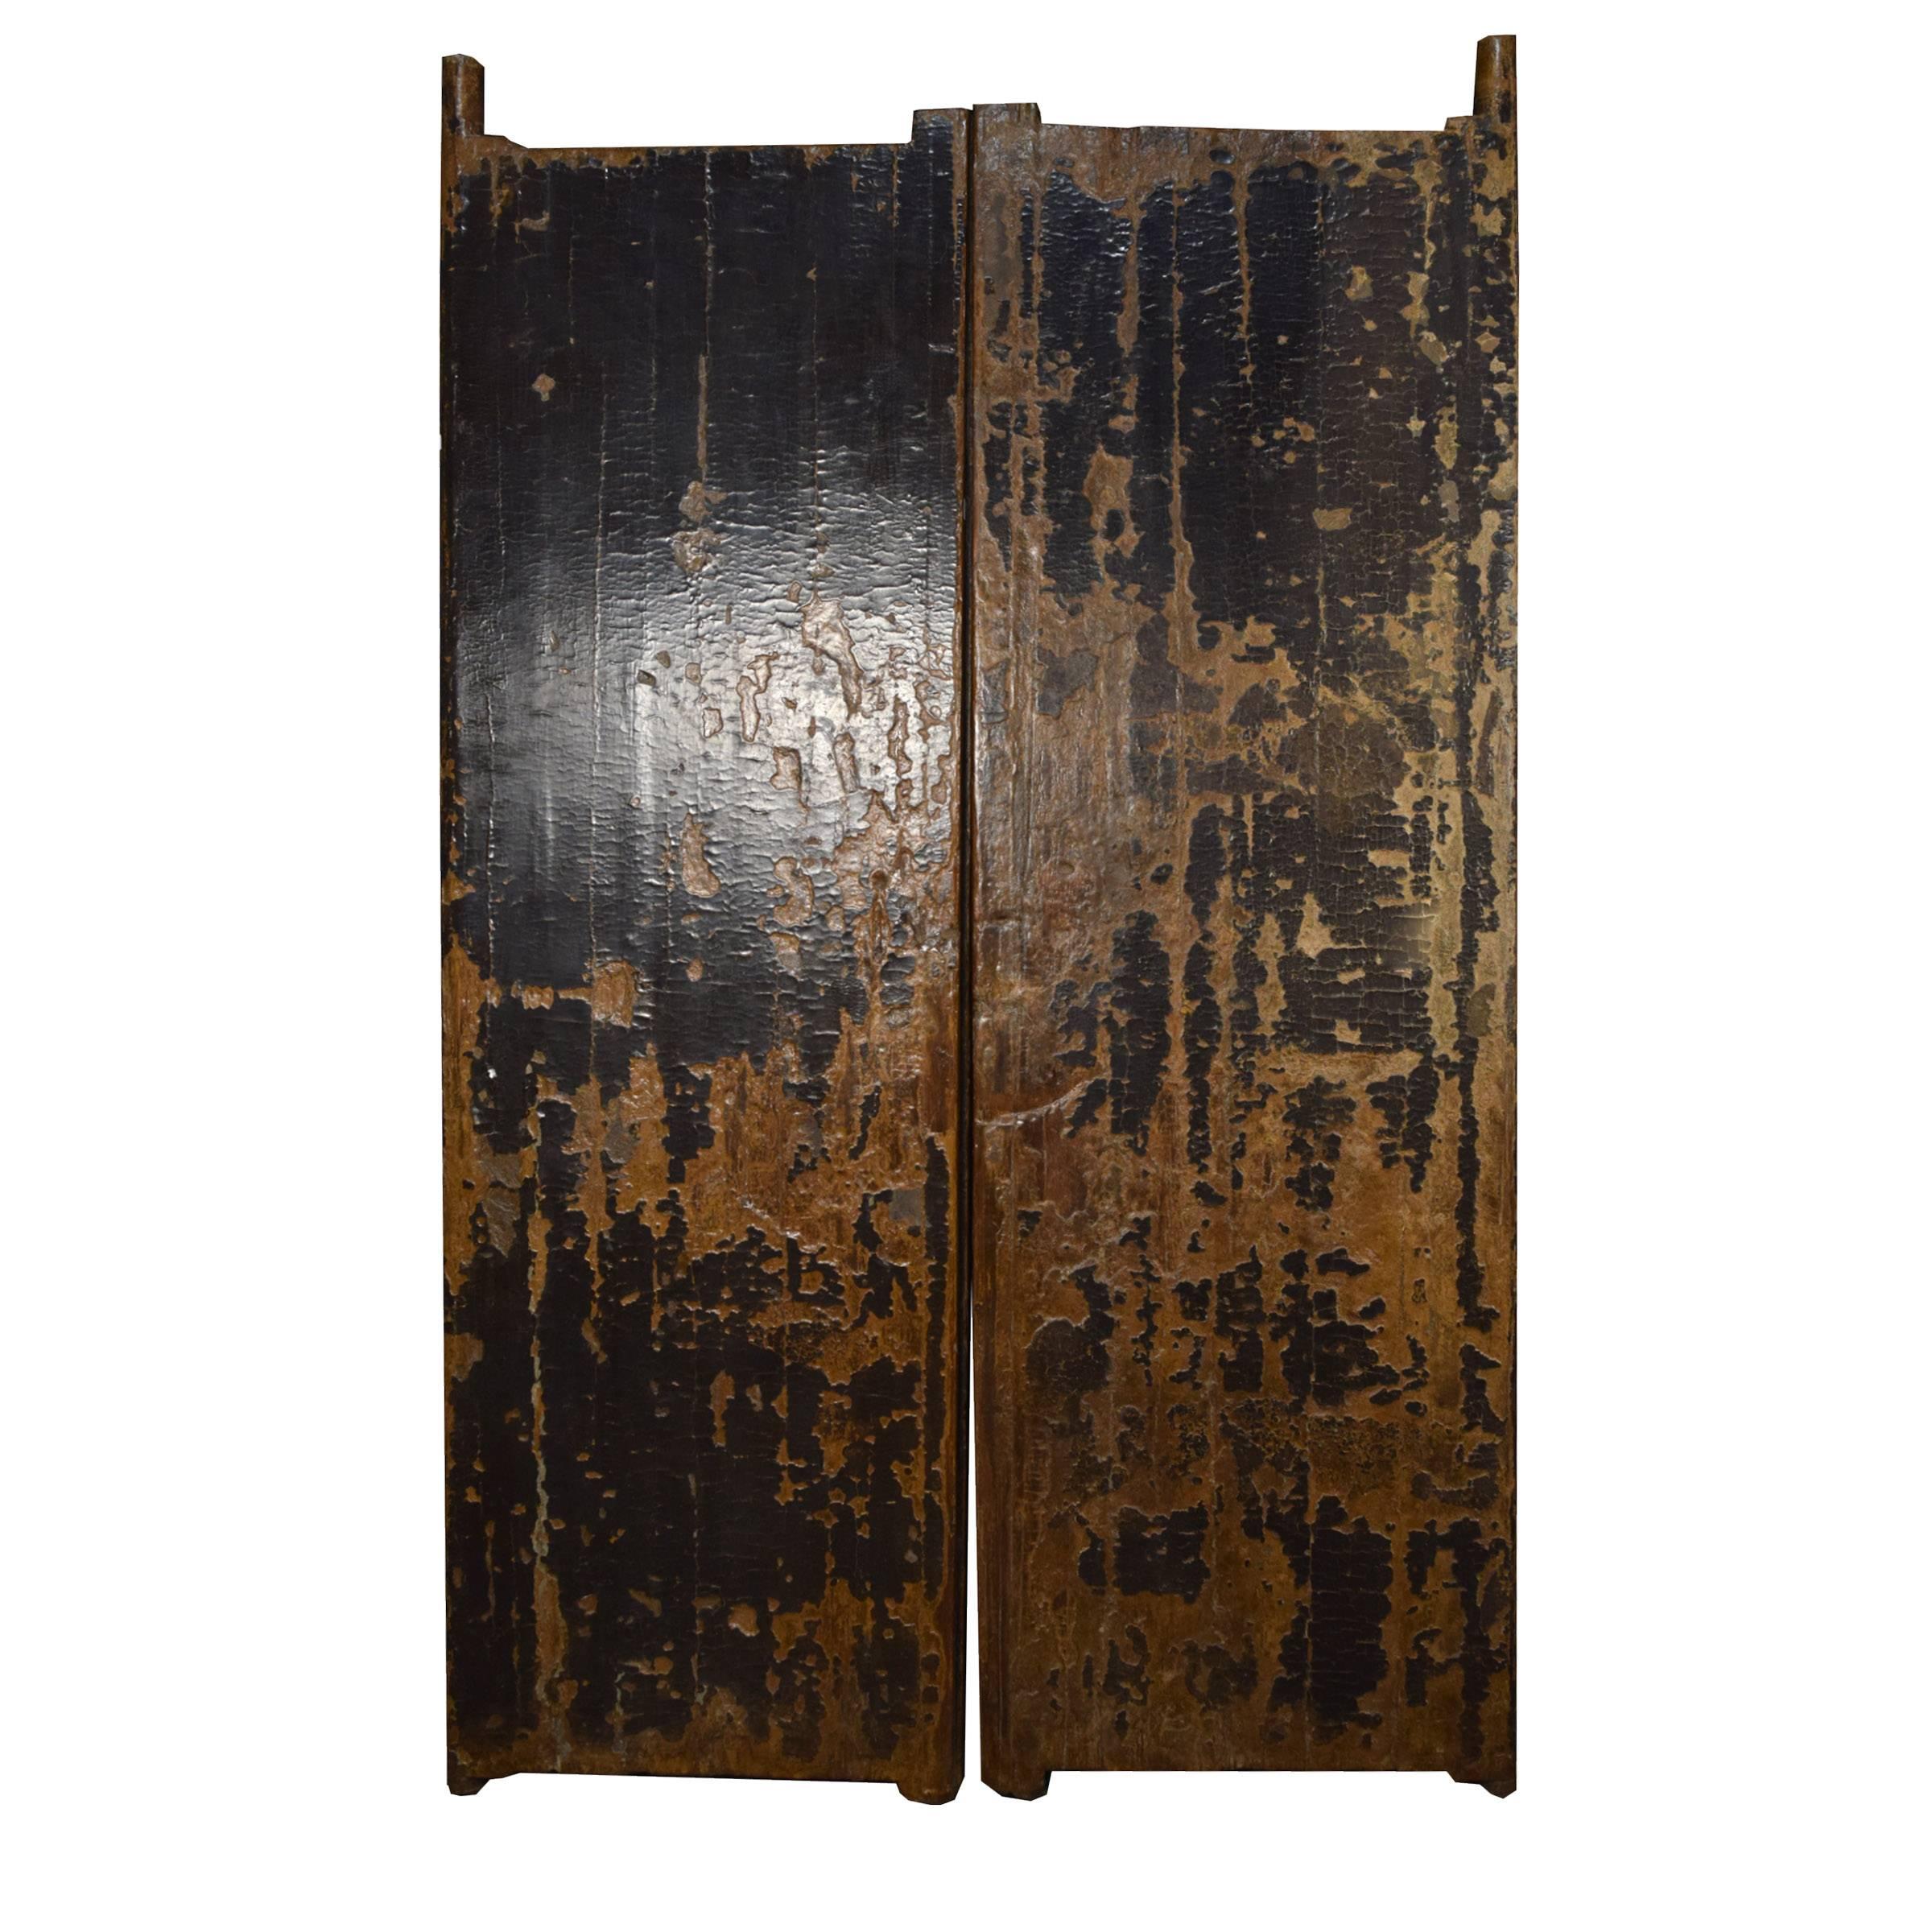 The countless coats of hand-applied black lacquer have aged with an inimitable crackle on this pair of 19th century doors, which would have originally been the outermost entrance gates to a traditional home in Northern China. The graphic marks on